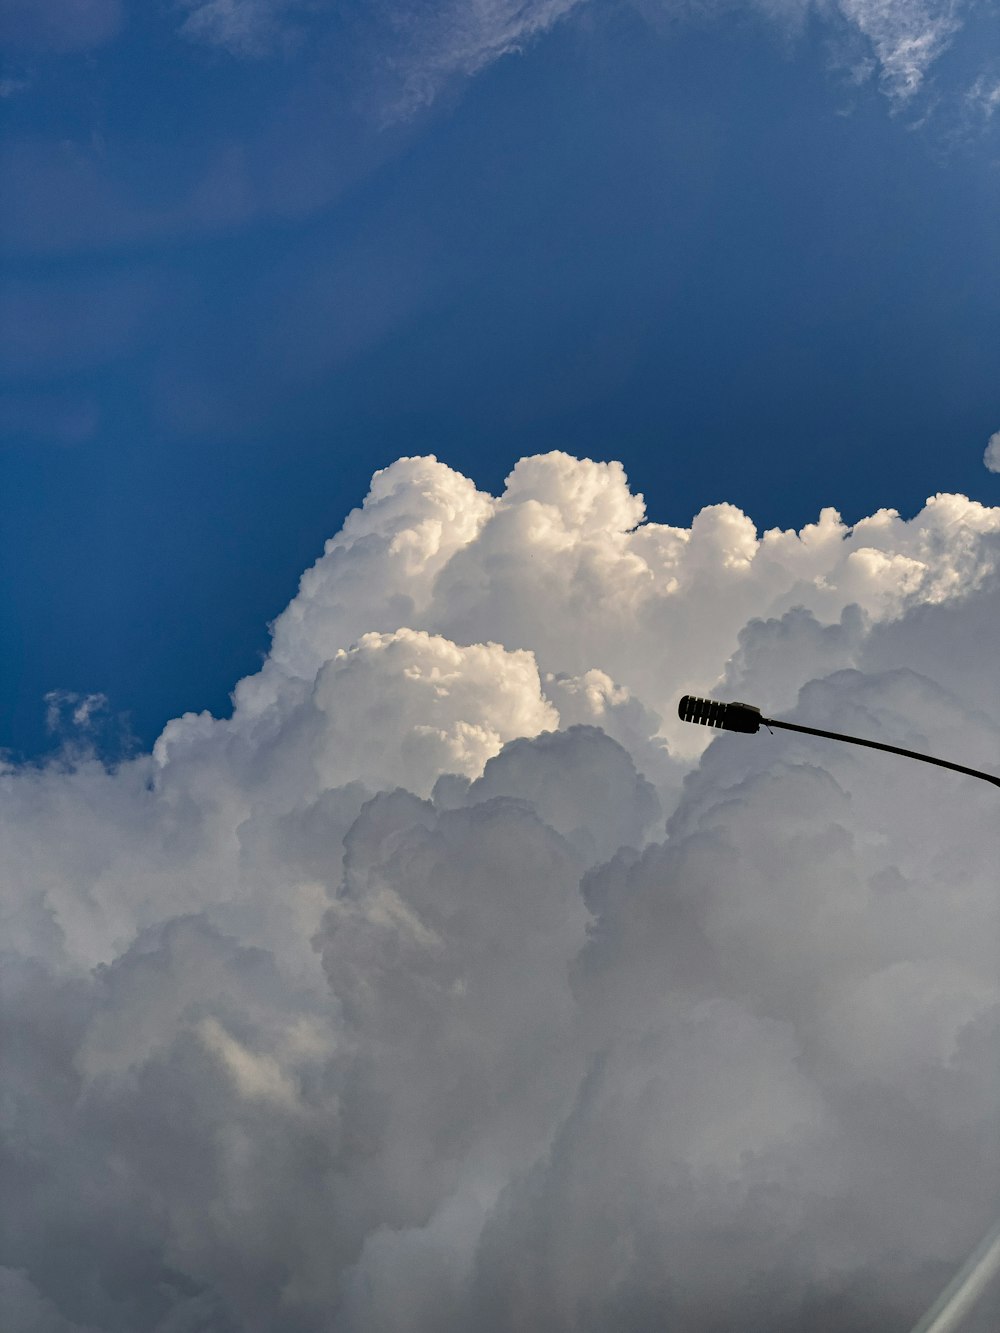 a street light in front of a cloud filled sky